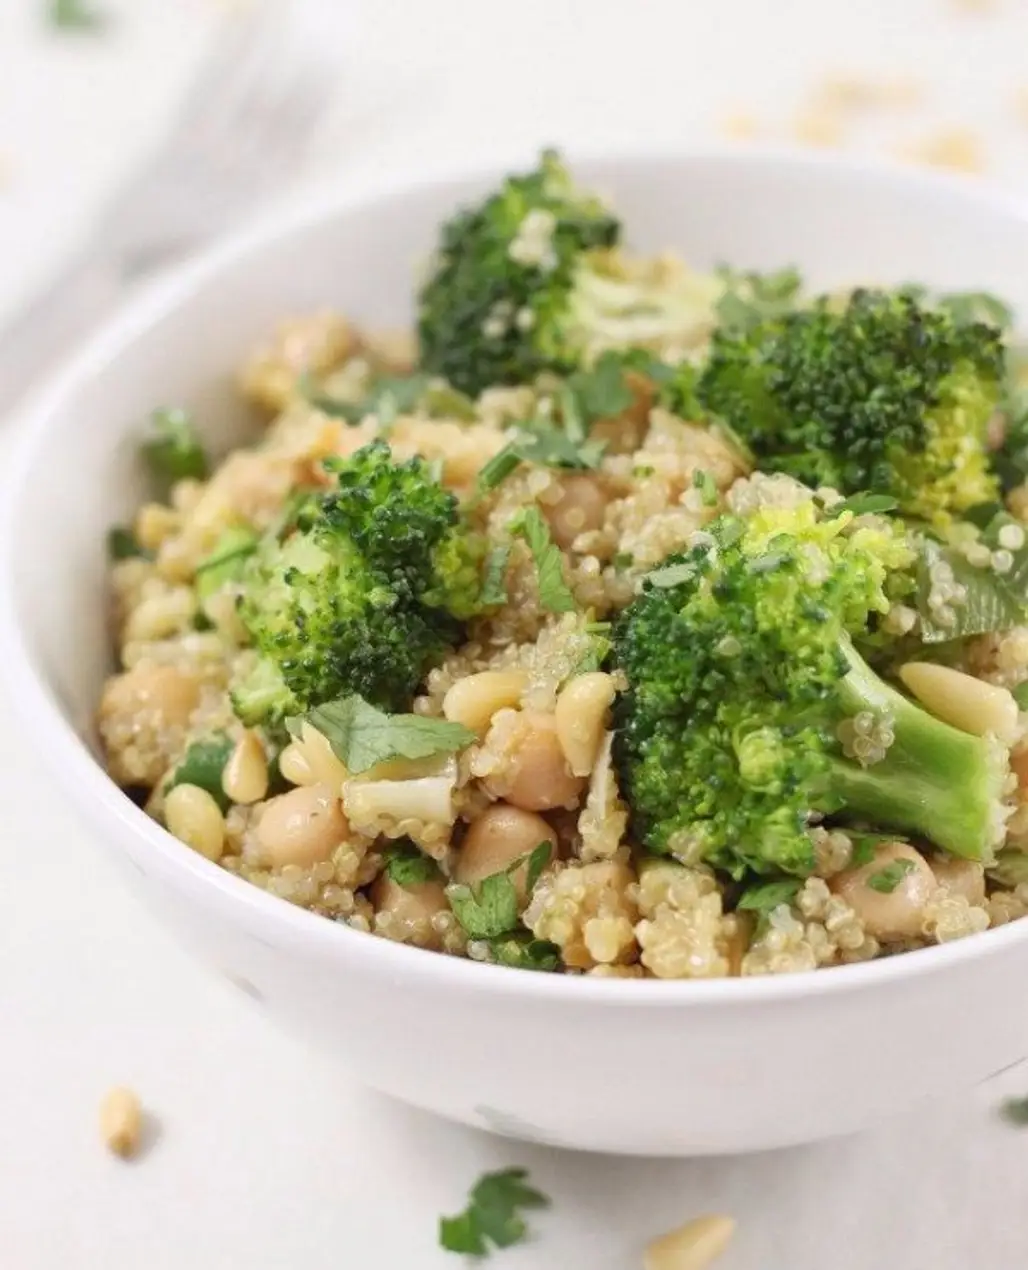 Garlicky Quinoa Bowls with Broccoli and Chickpeas